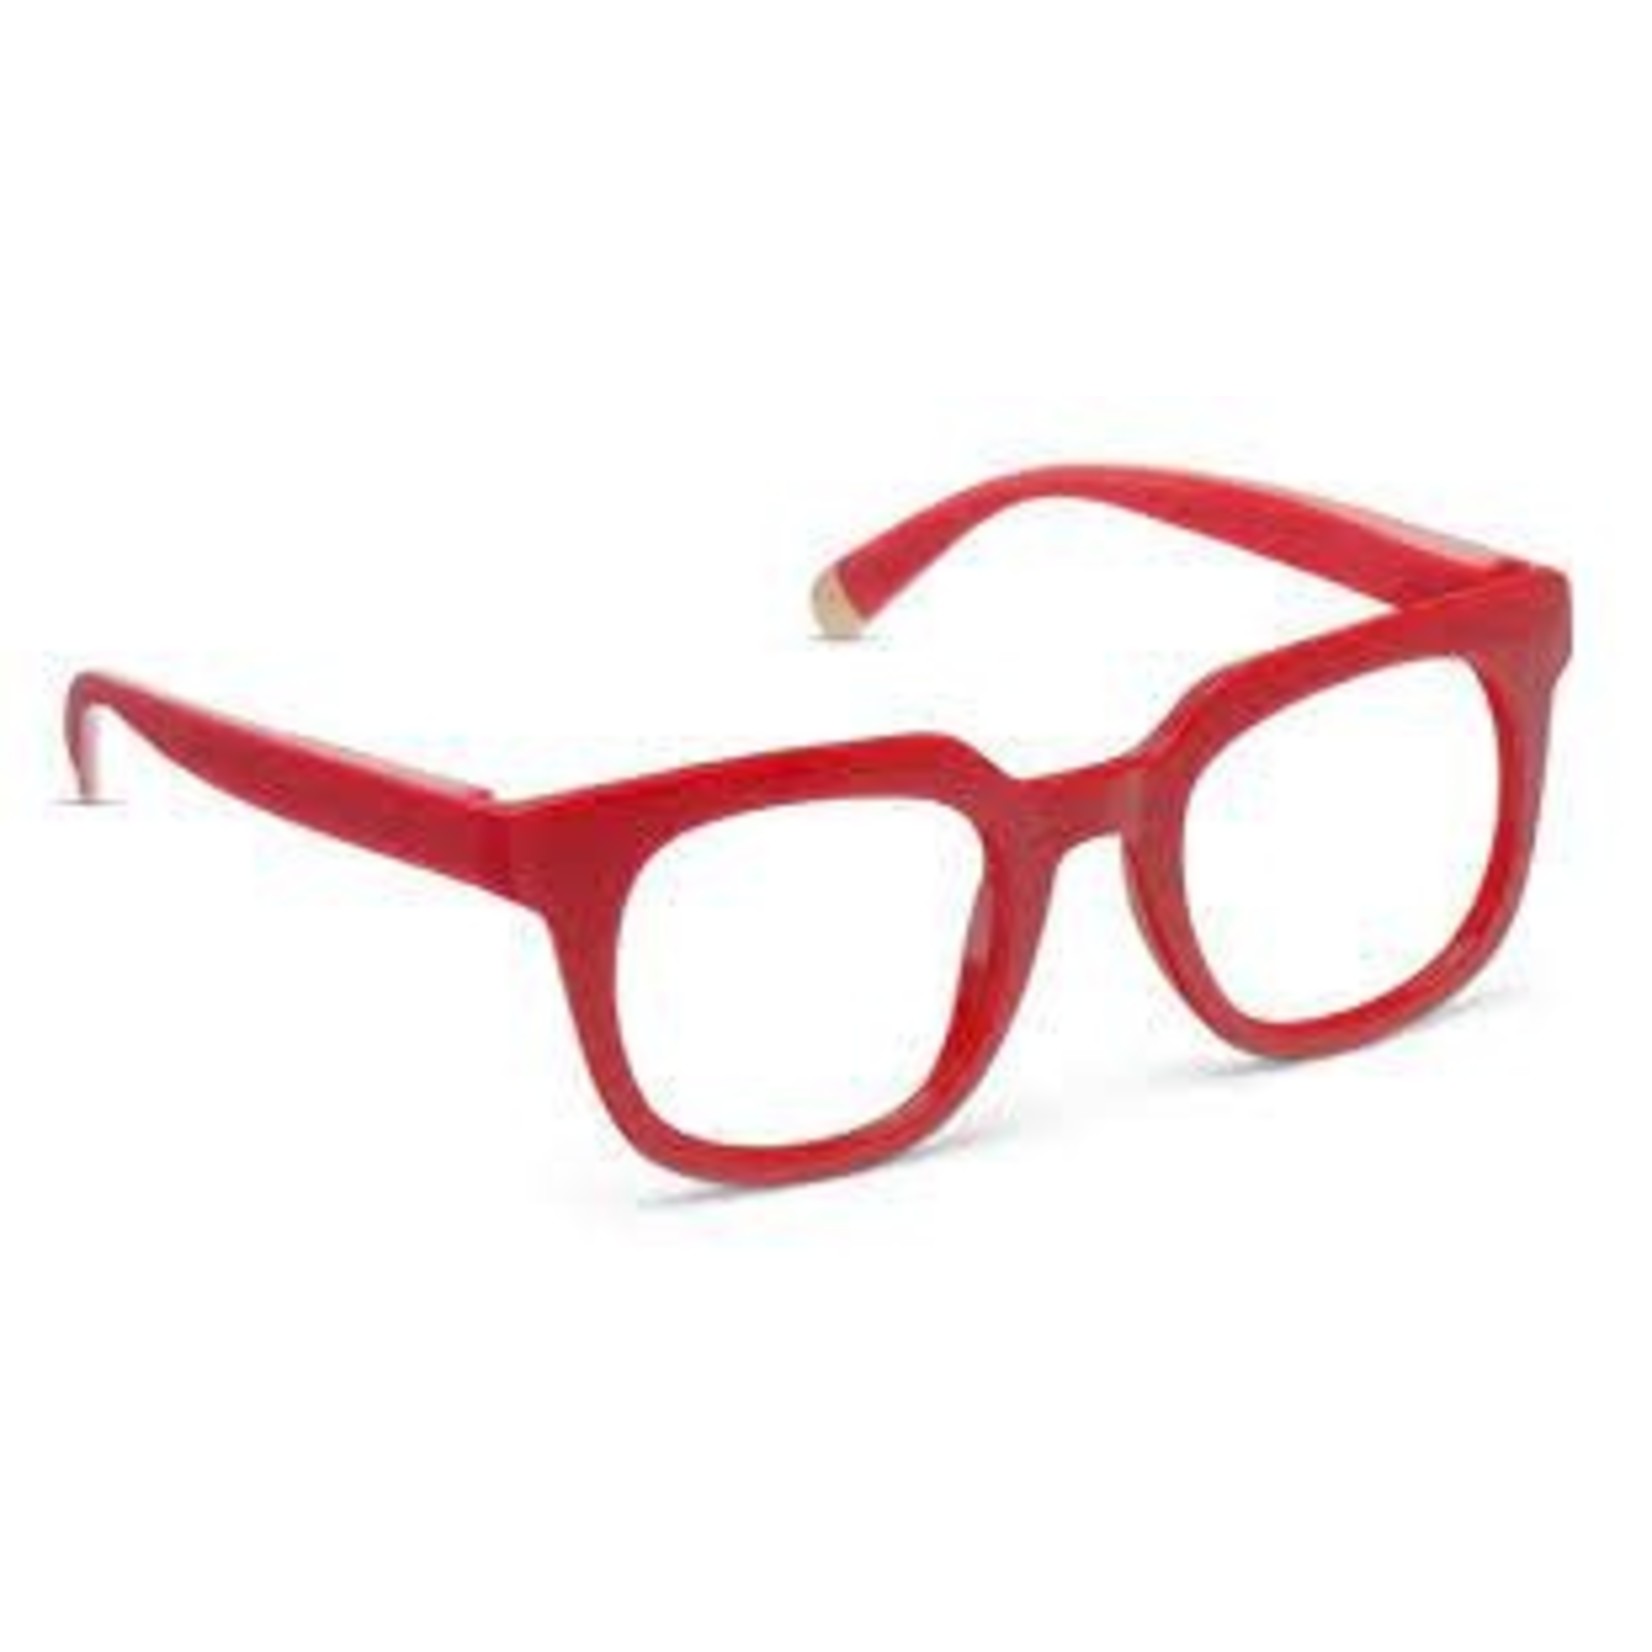 PEEPERS HARLOW RED